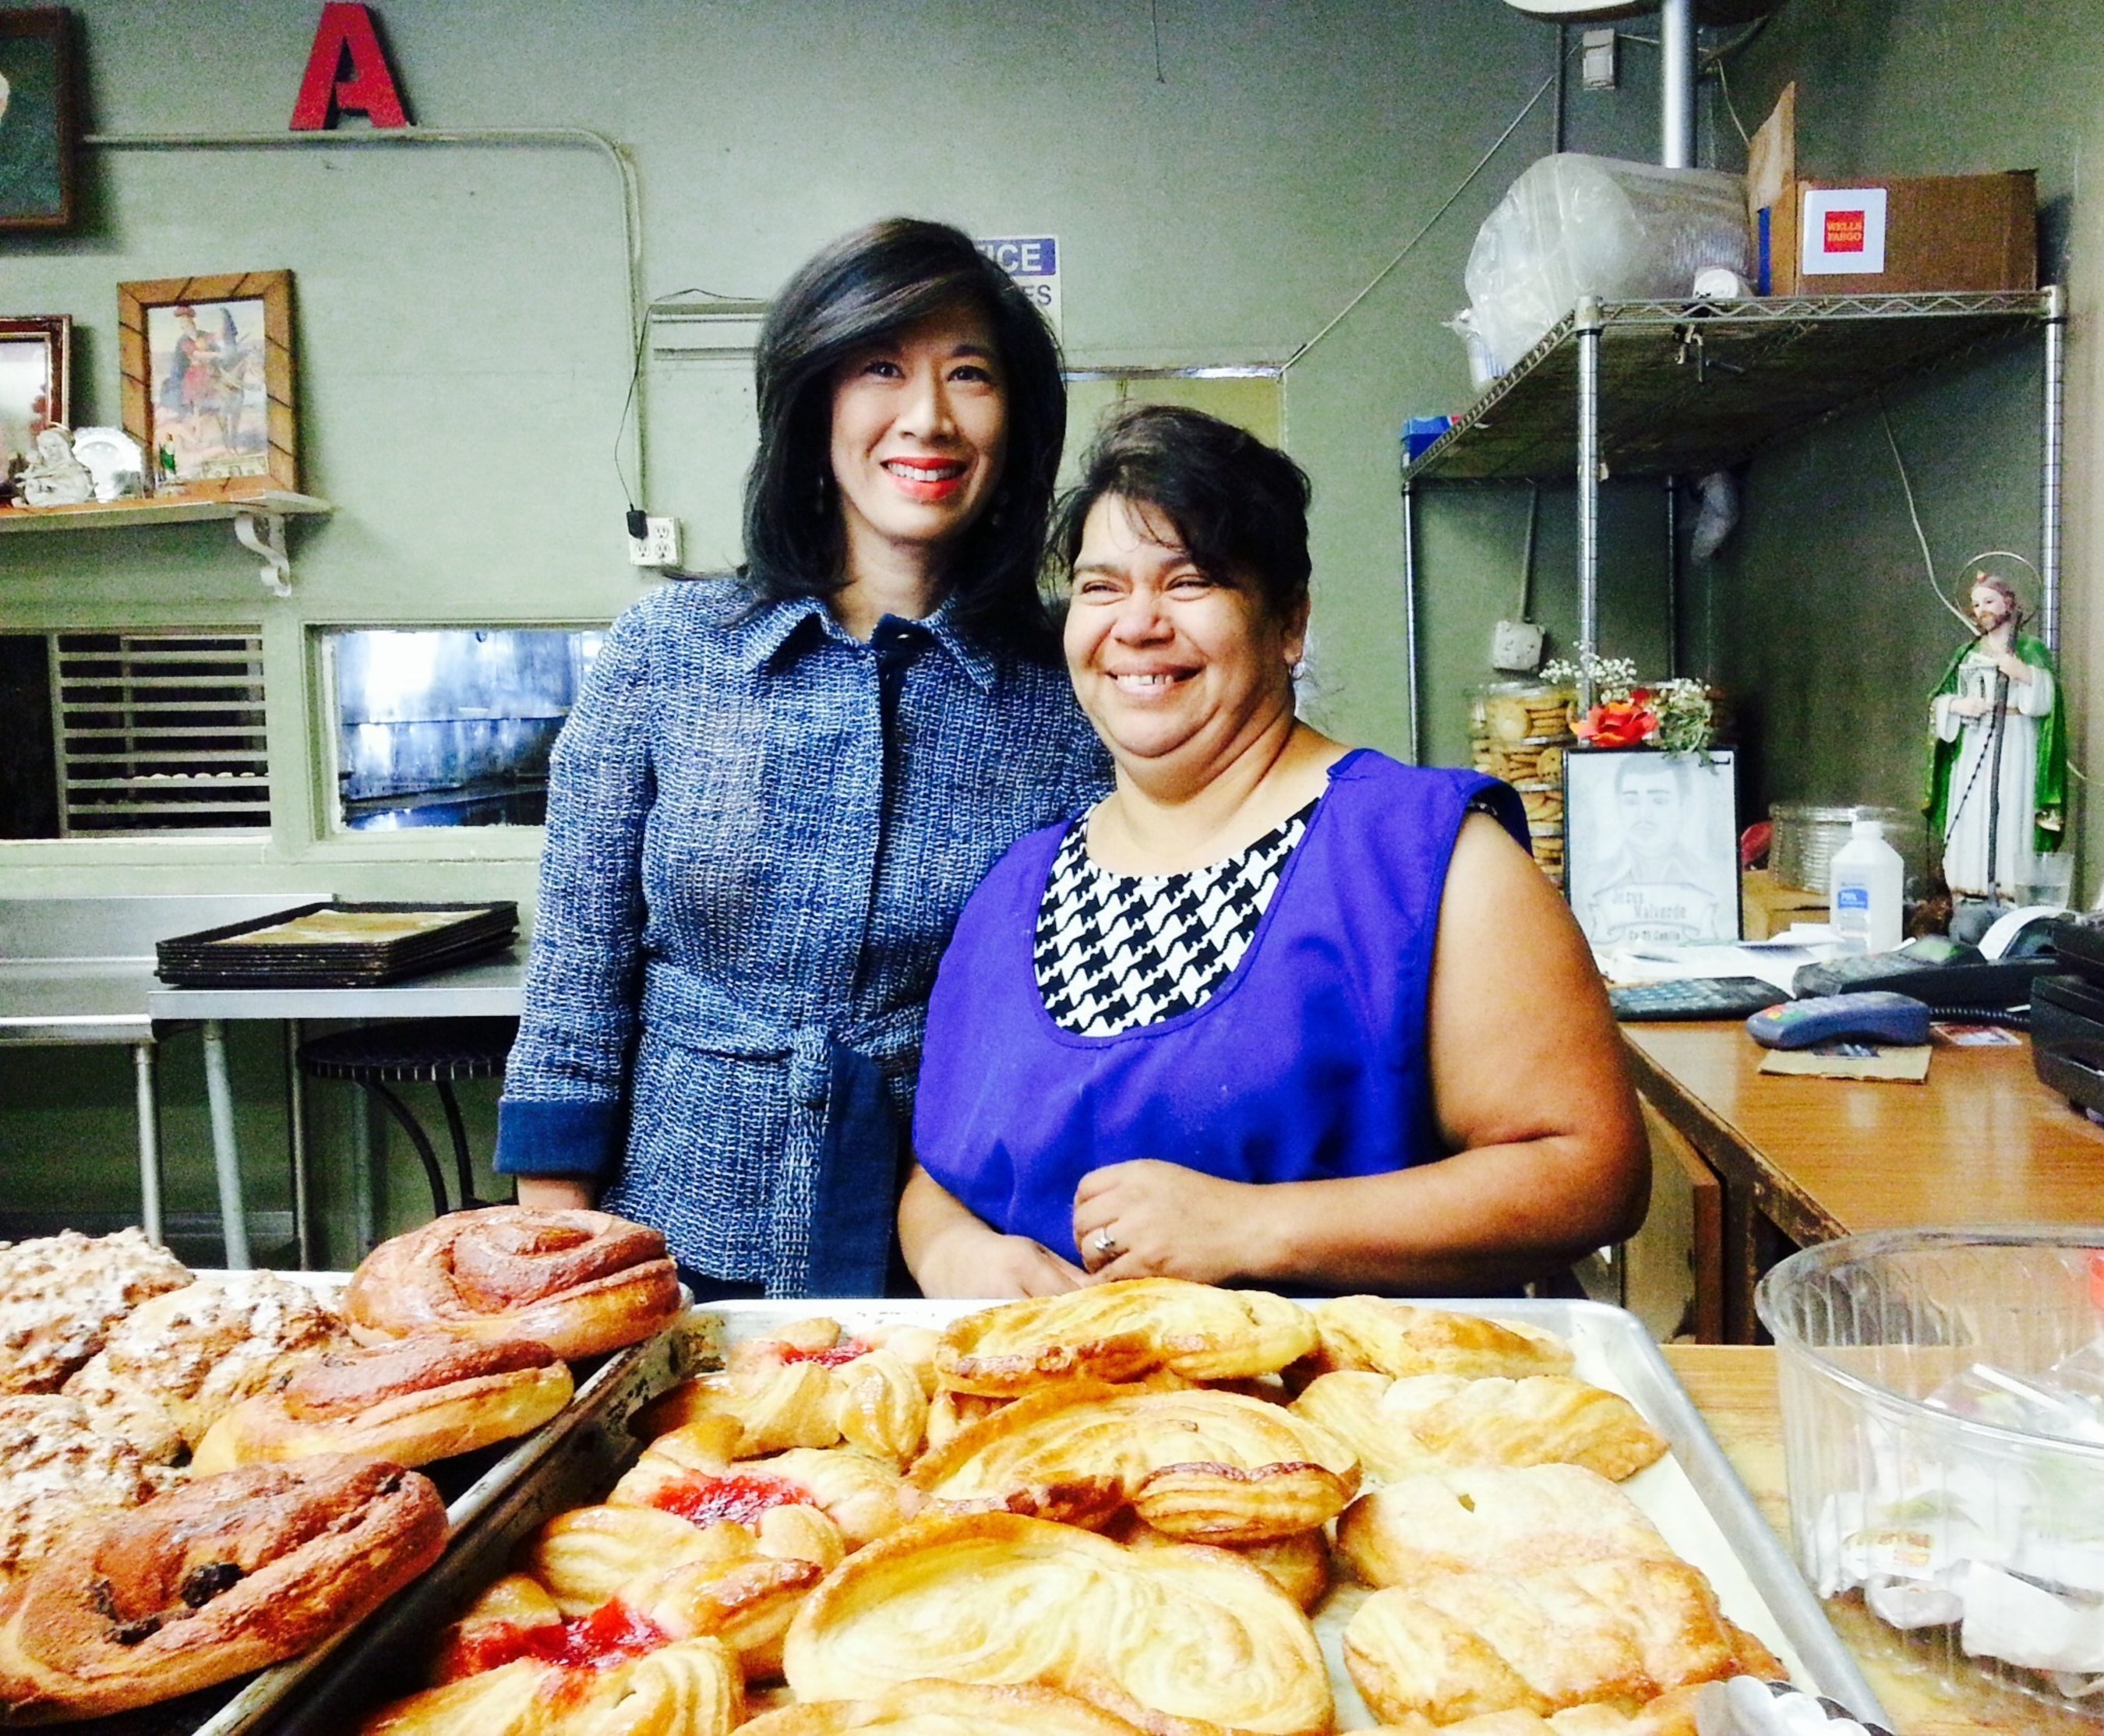 Grameen America CEO Andrea Jung with Bertha, a baker in Los Angeles who is growing her business thanks to a microloan from Grameen America.